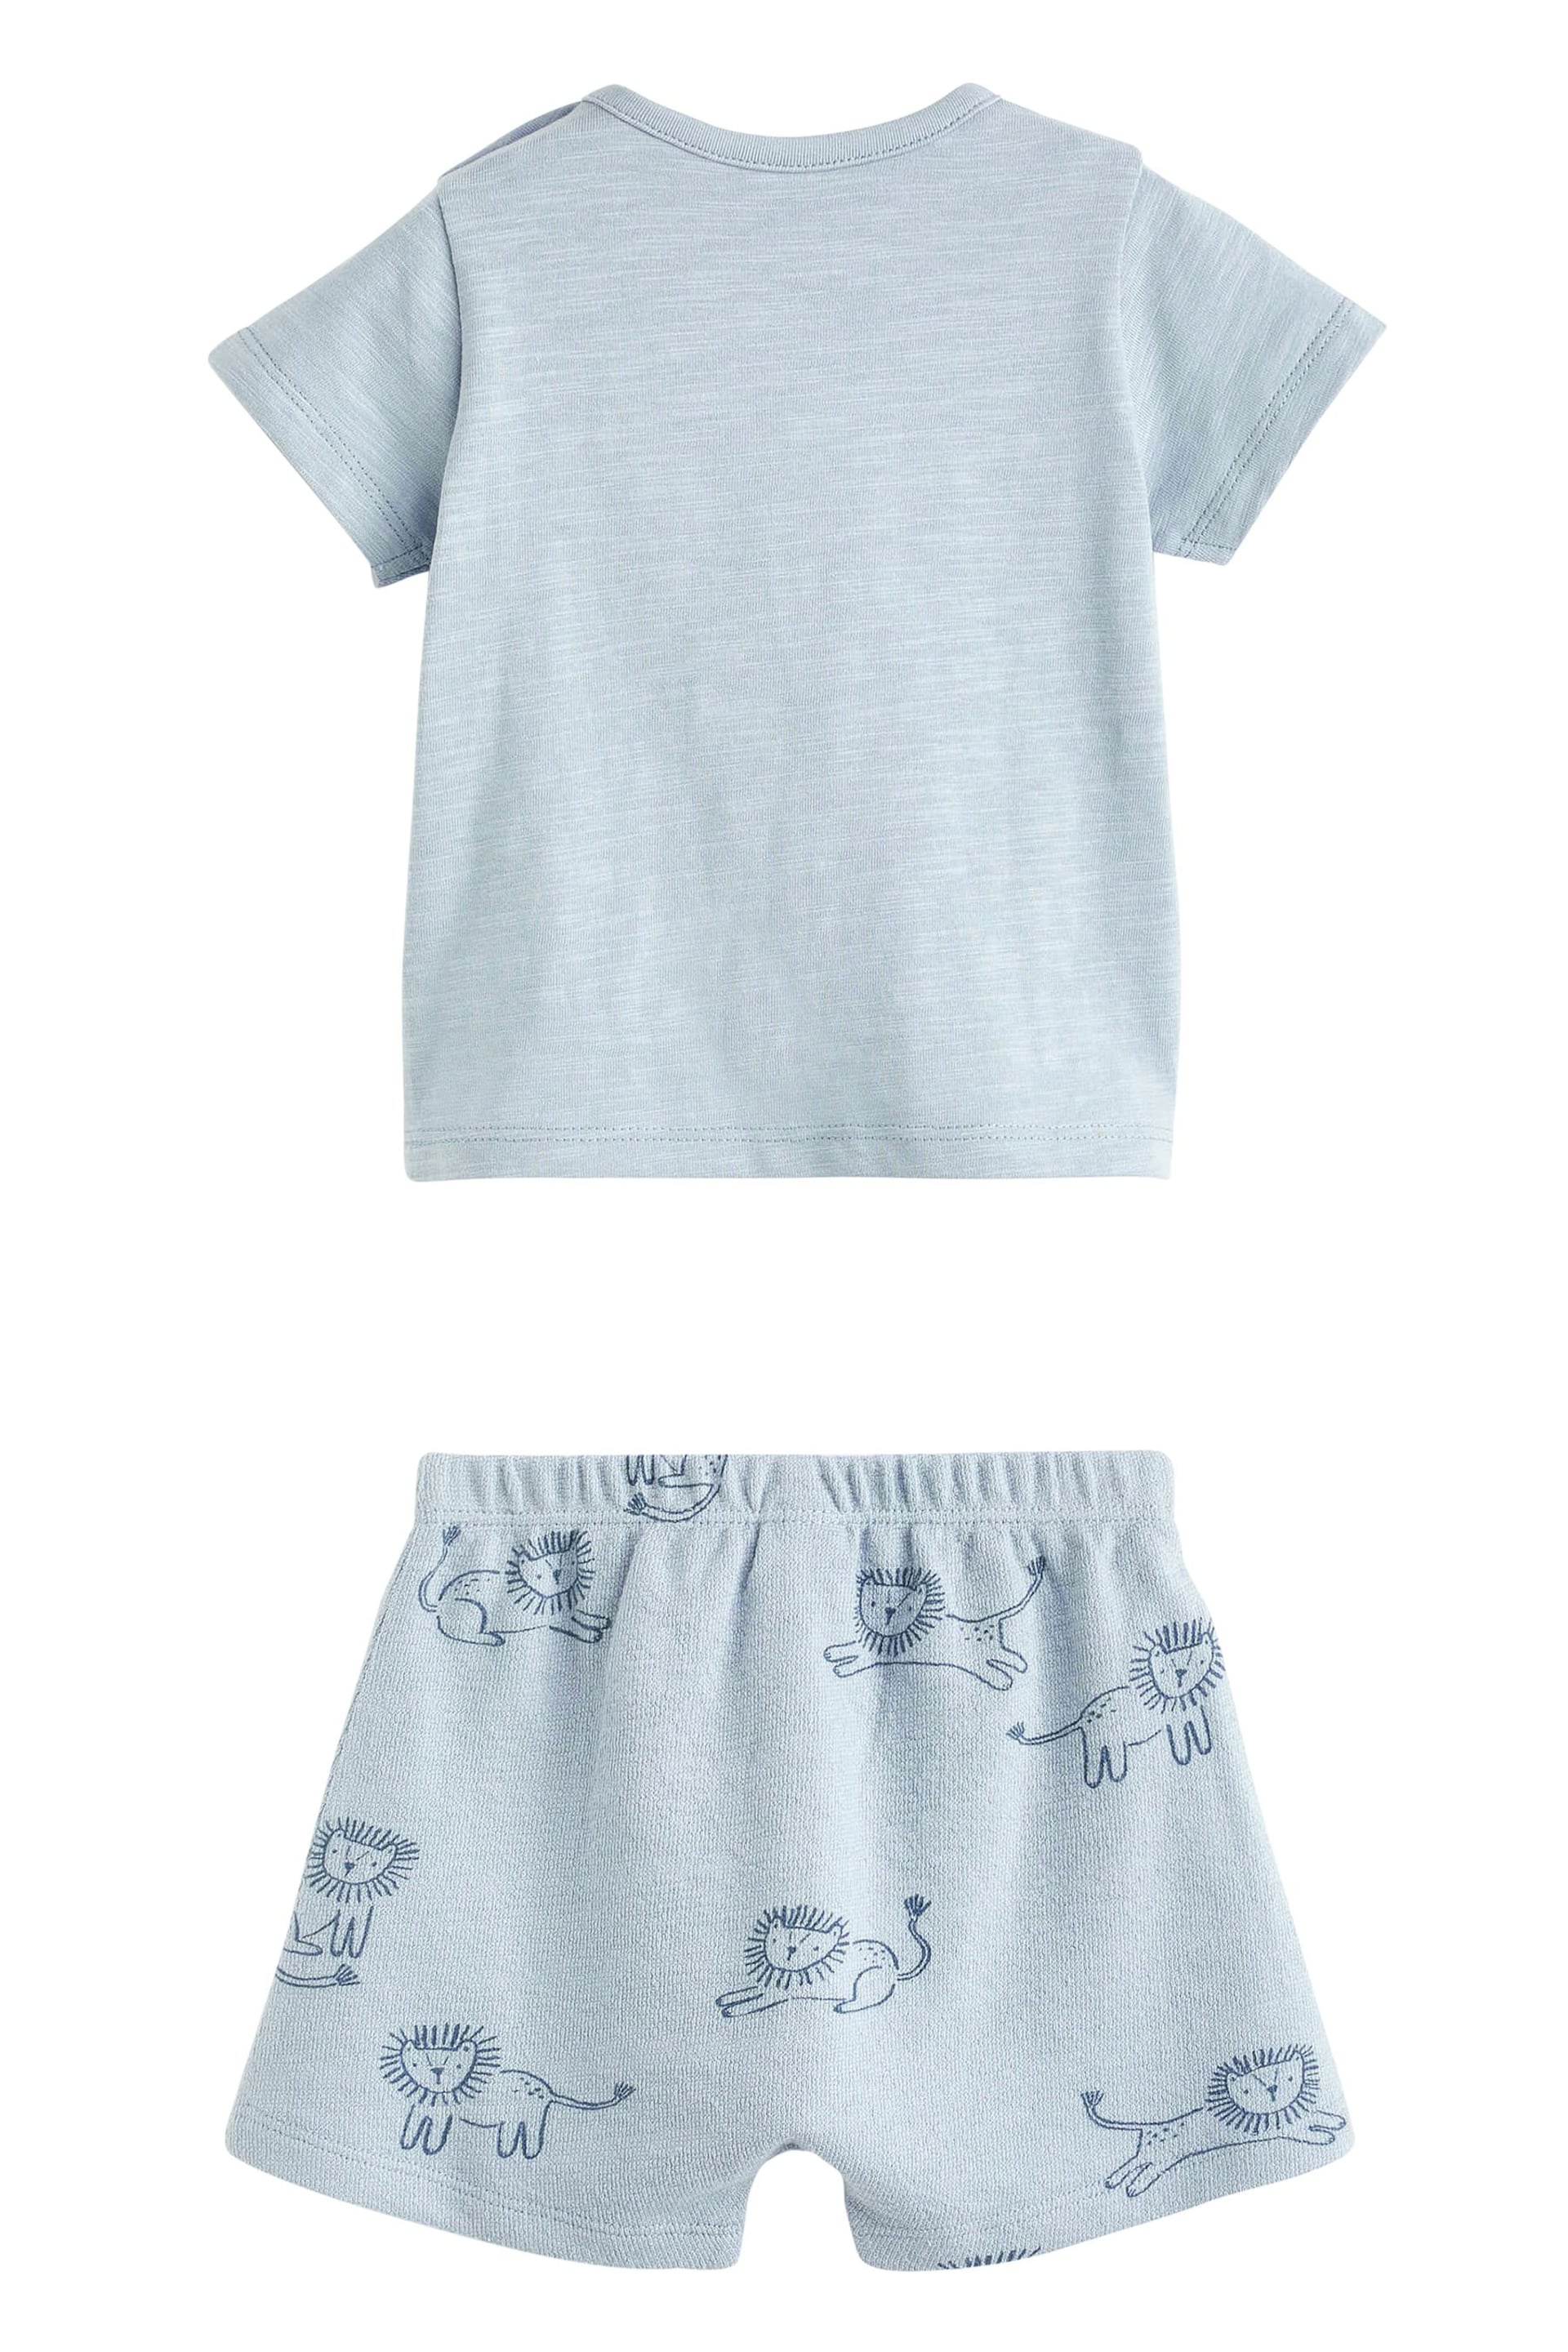 Teal Blue Lion Baby T-Shirt And Shorts 2 Piece Set - Image 7 of 13